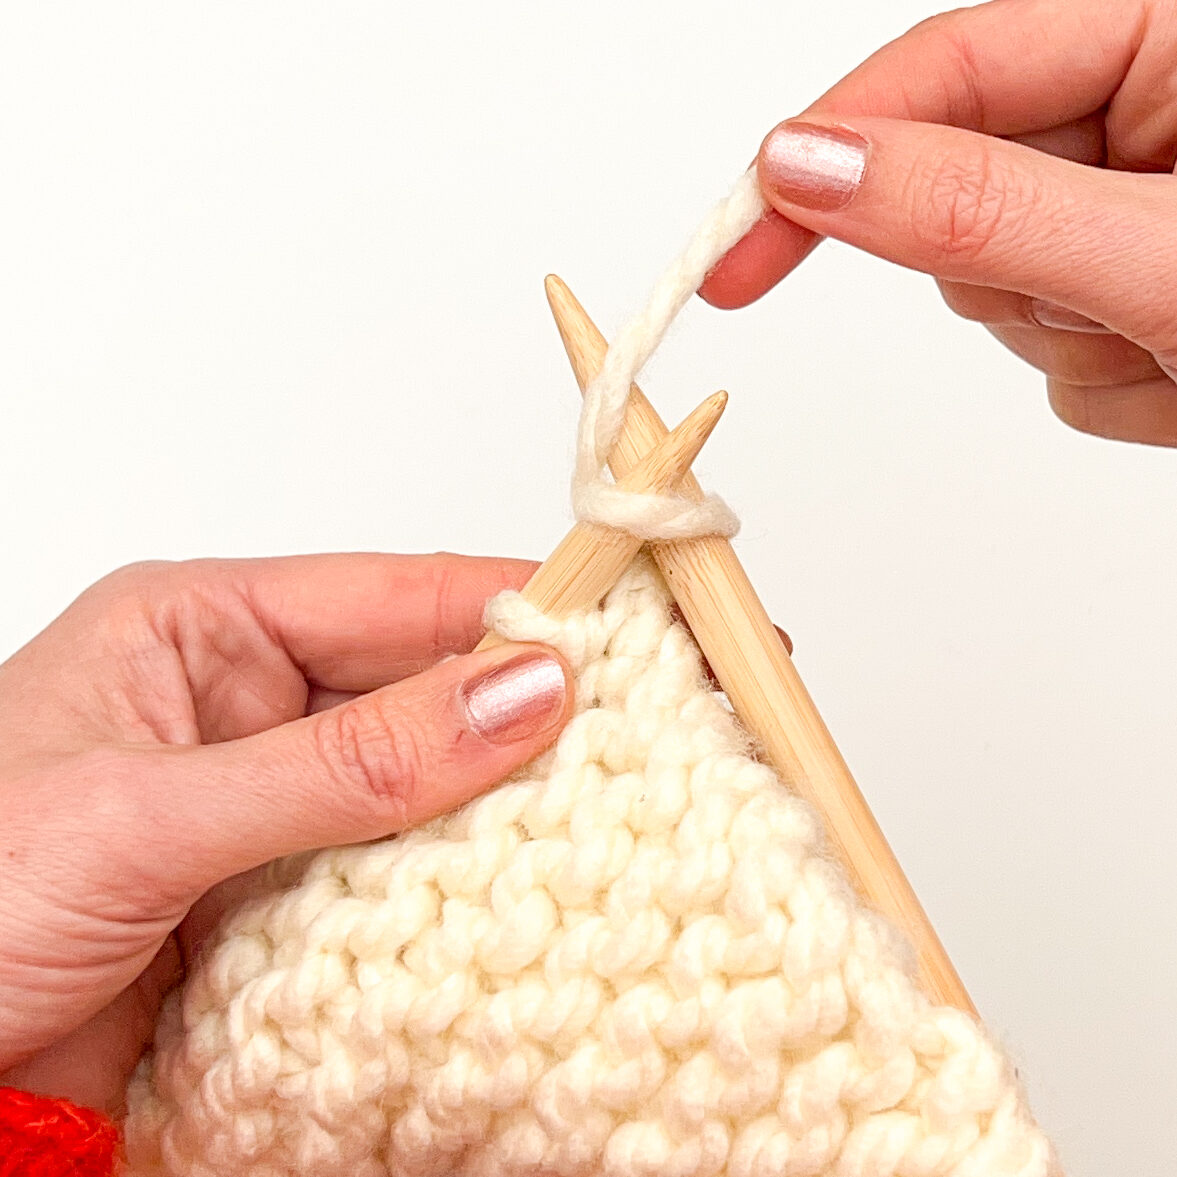 English style knitting - how to throw the yarn step 2